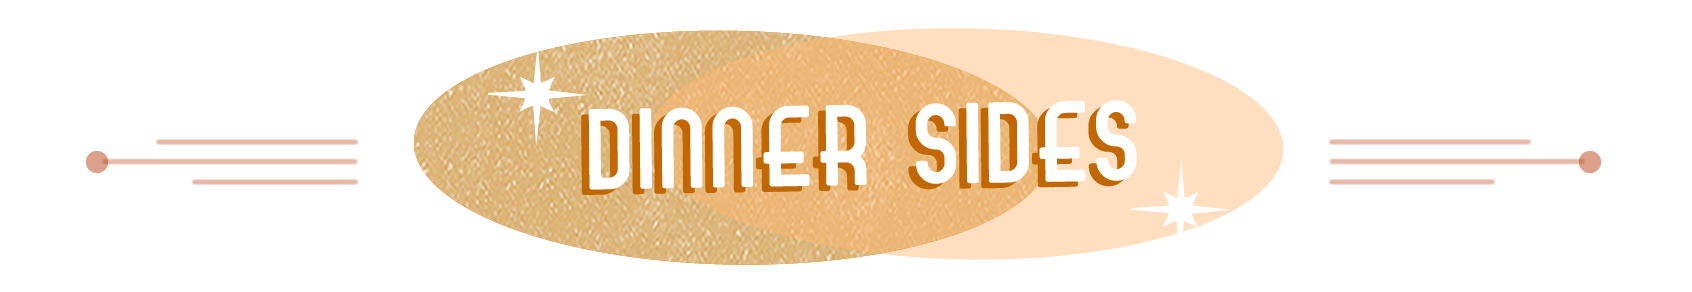 title text Dinner Sides with overlapping orange and brown ovals behind it